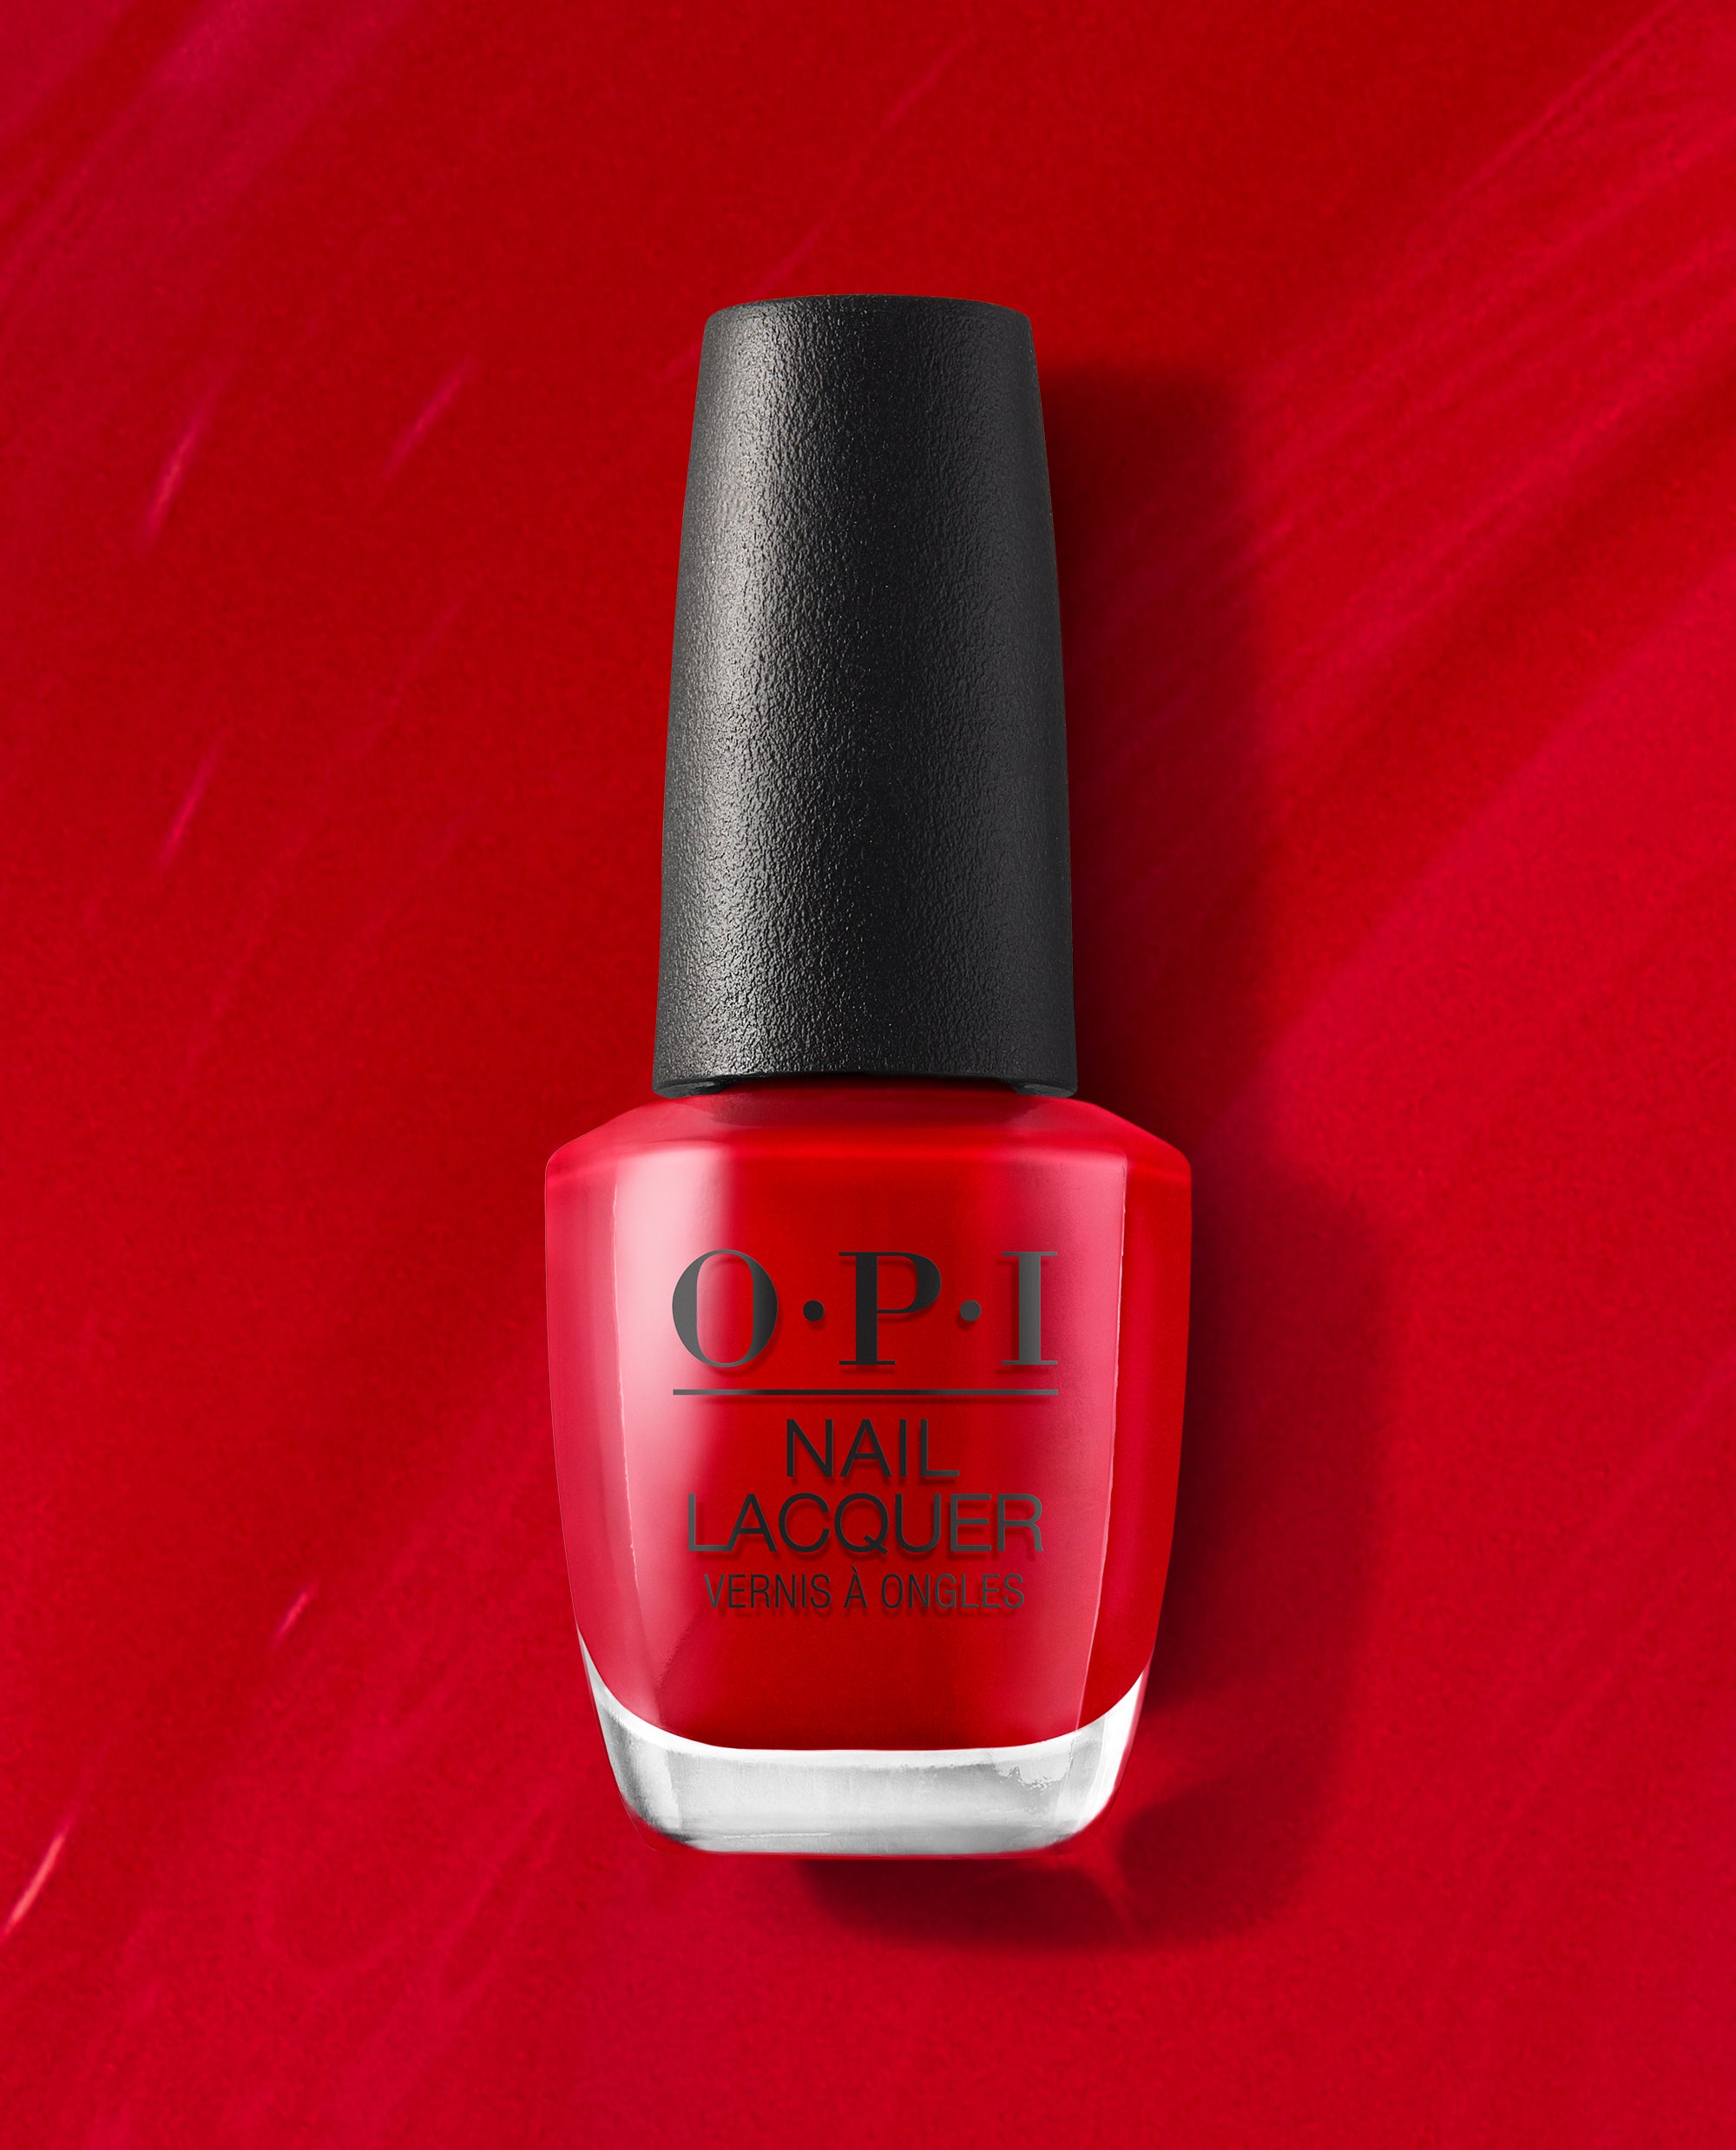 OPI Nail Lacquer, Opaque & Vibrant Crme Finish Red Nail Polish, Up to 7  Days of Wear, Chip Resistant & Fast Drying, Big Apple Red, 0.5 fl oz